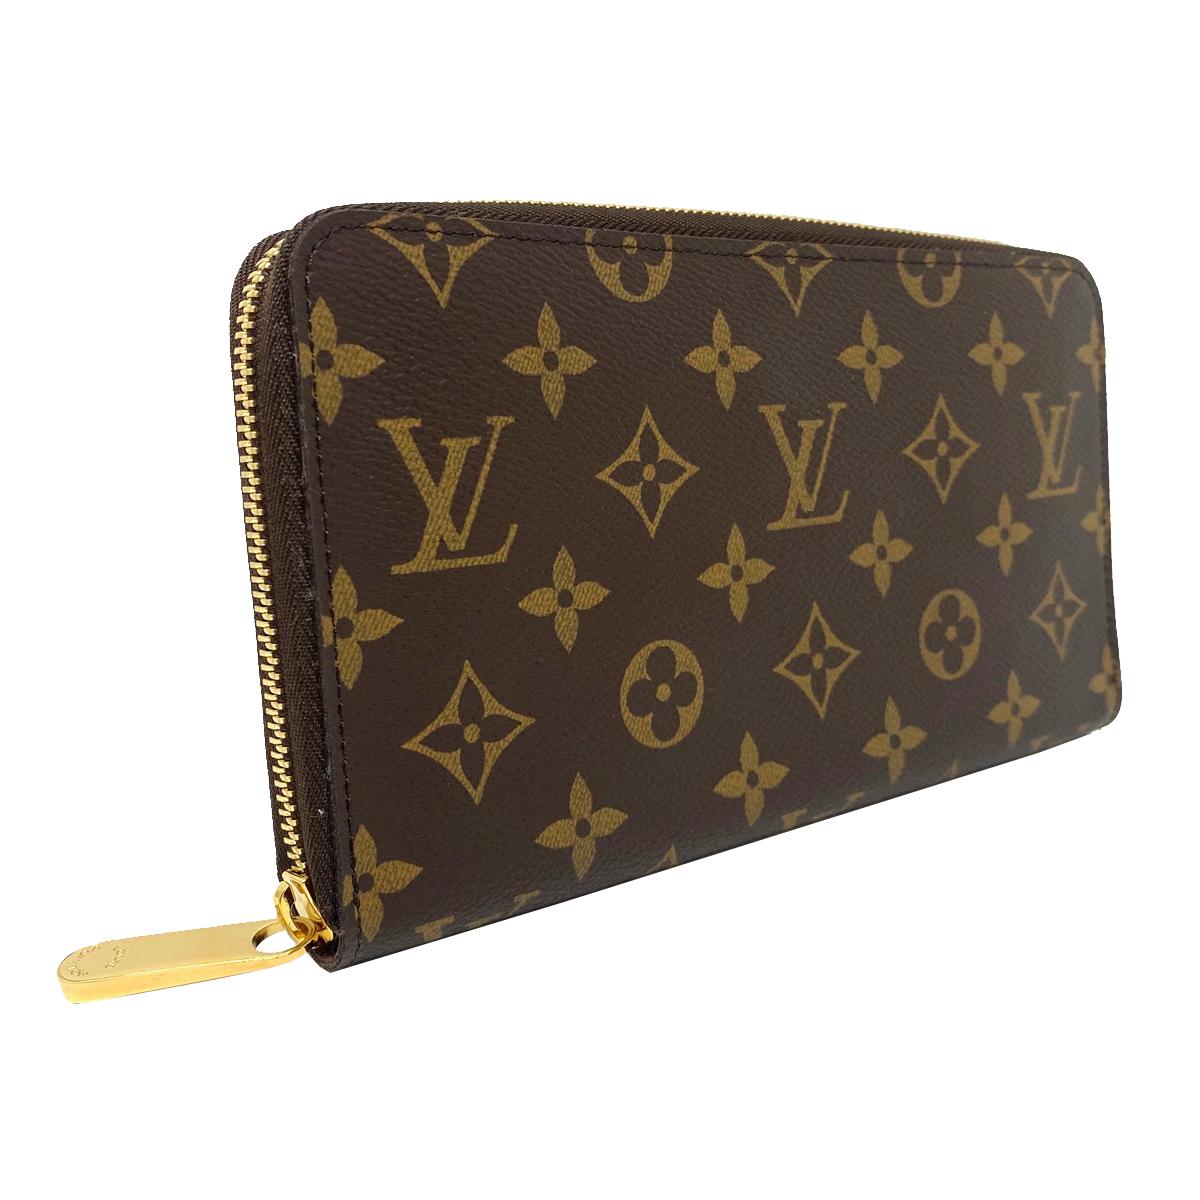 Company-Louis Vuitton
Model-Monogram Zippy Organizer Wallet 
Color-Brown 
Date Code-CA4125
Material-Monogram Leather Canvas
Measurements-8.27 x 4.53 x 0.79 inches
Inside-No rips, tears or marks 
Outside-No rips, tears or marks
Outside Pockets-No